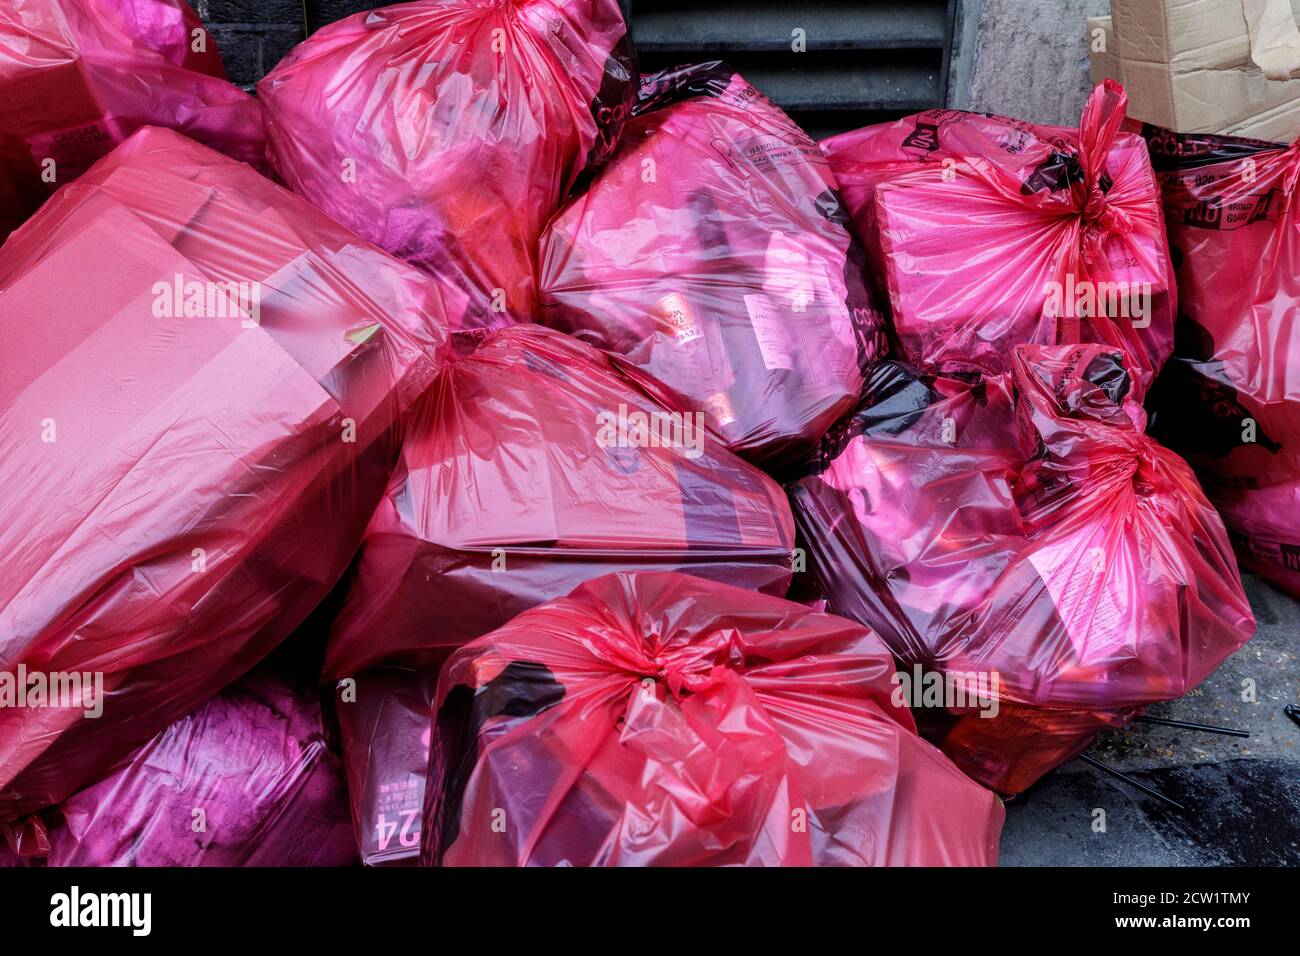 Bags of trash pile up on the sidewalk in London, England. Stock Photo